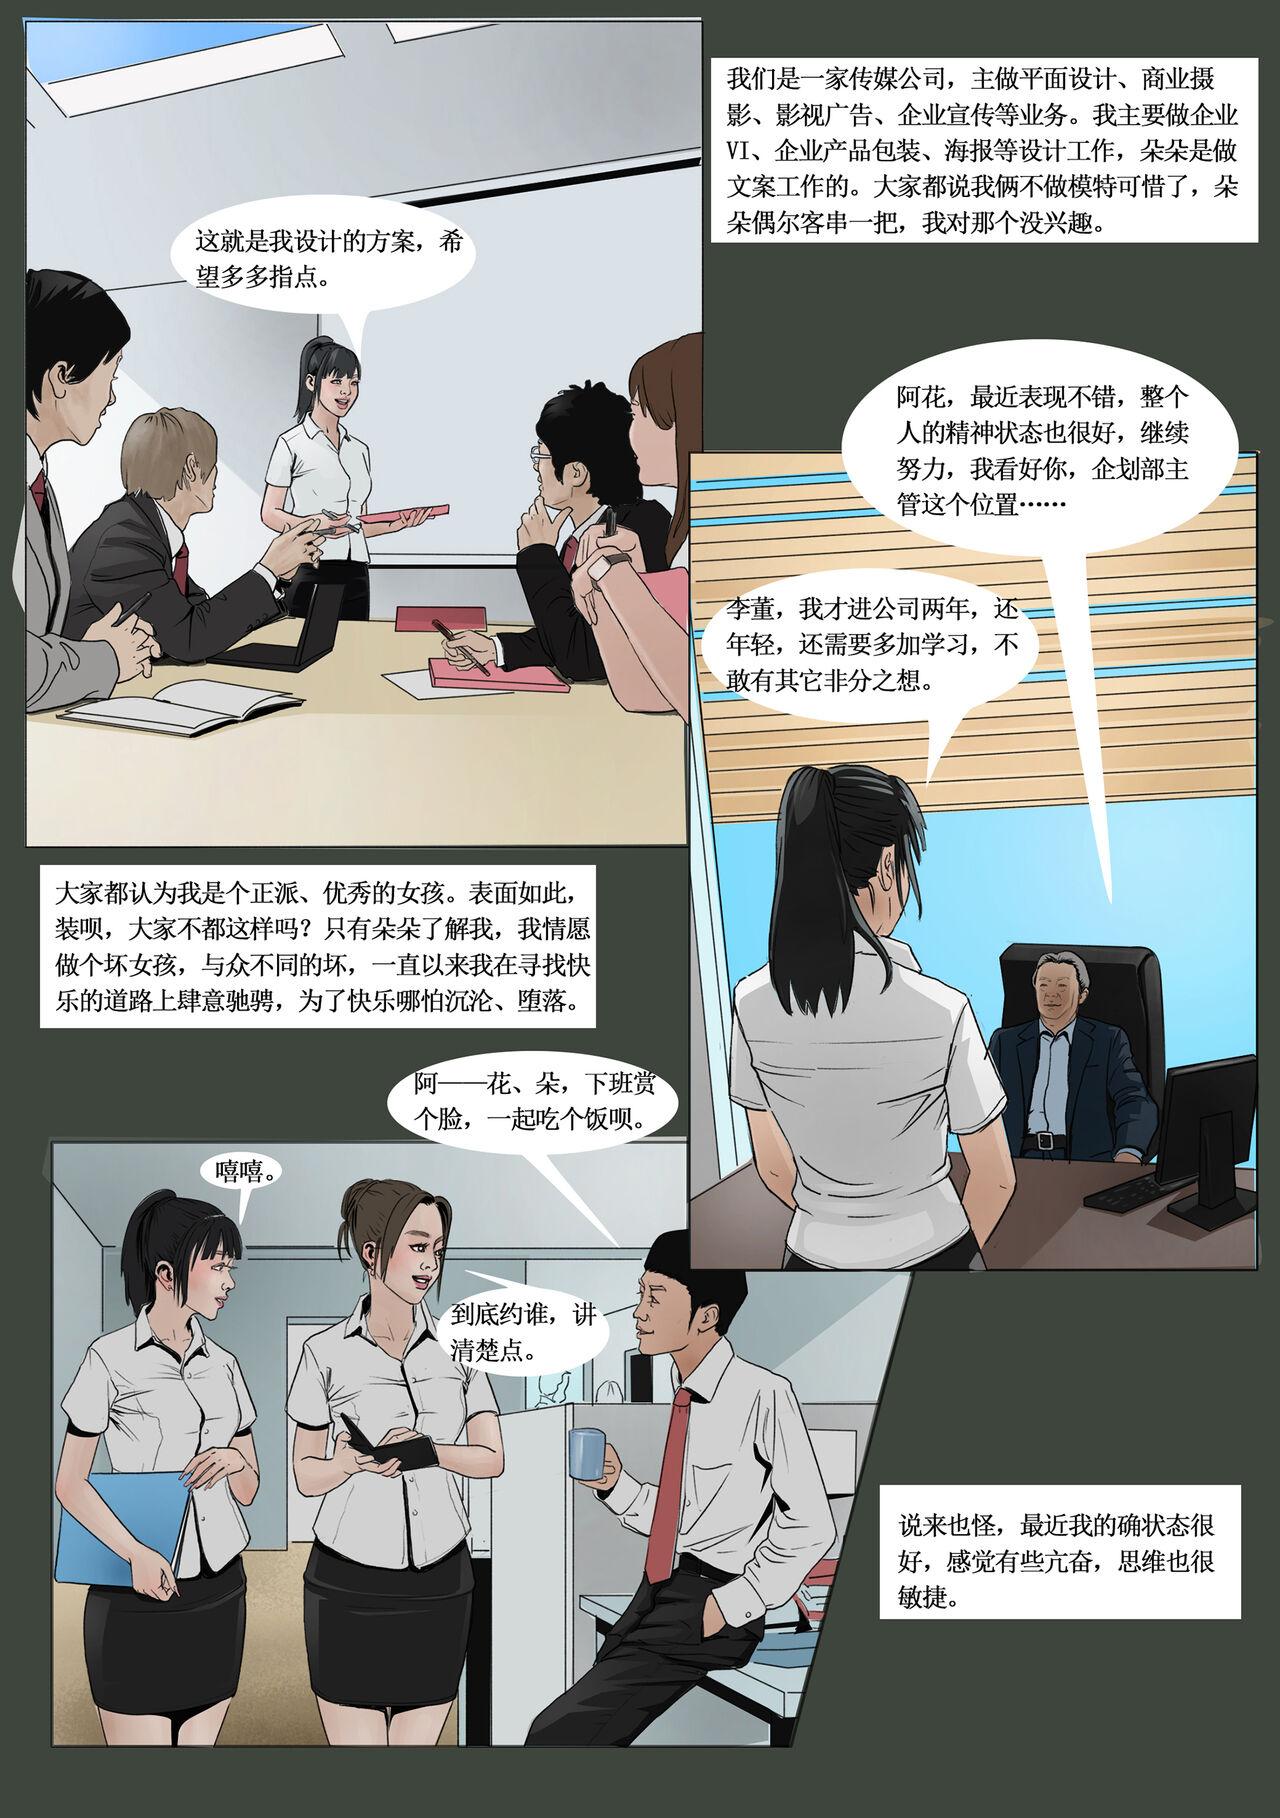 Blow Job 枫语Foryou《阿花与阿朵》第二话 A hua and A duo 2 Chinese Ejaculations - Page 10